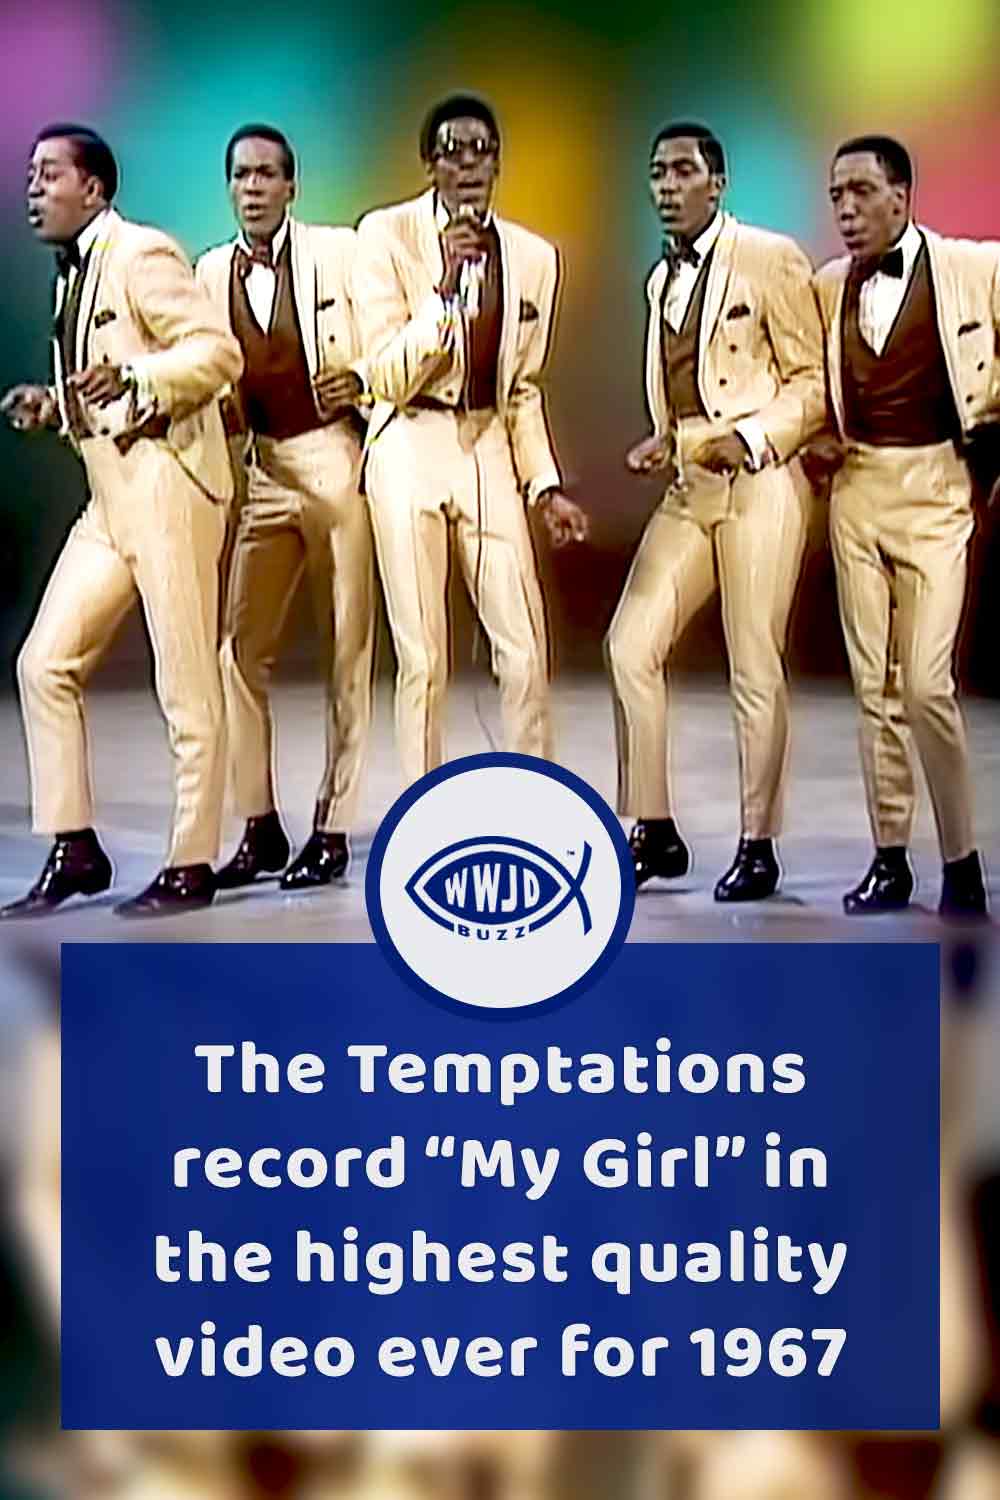 The Temptations record “My Girl” in the highest quality video ever for 1967